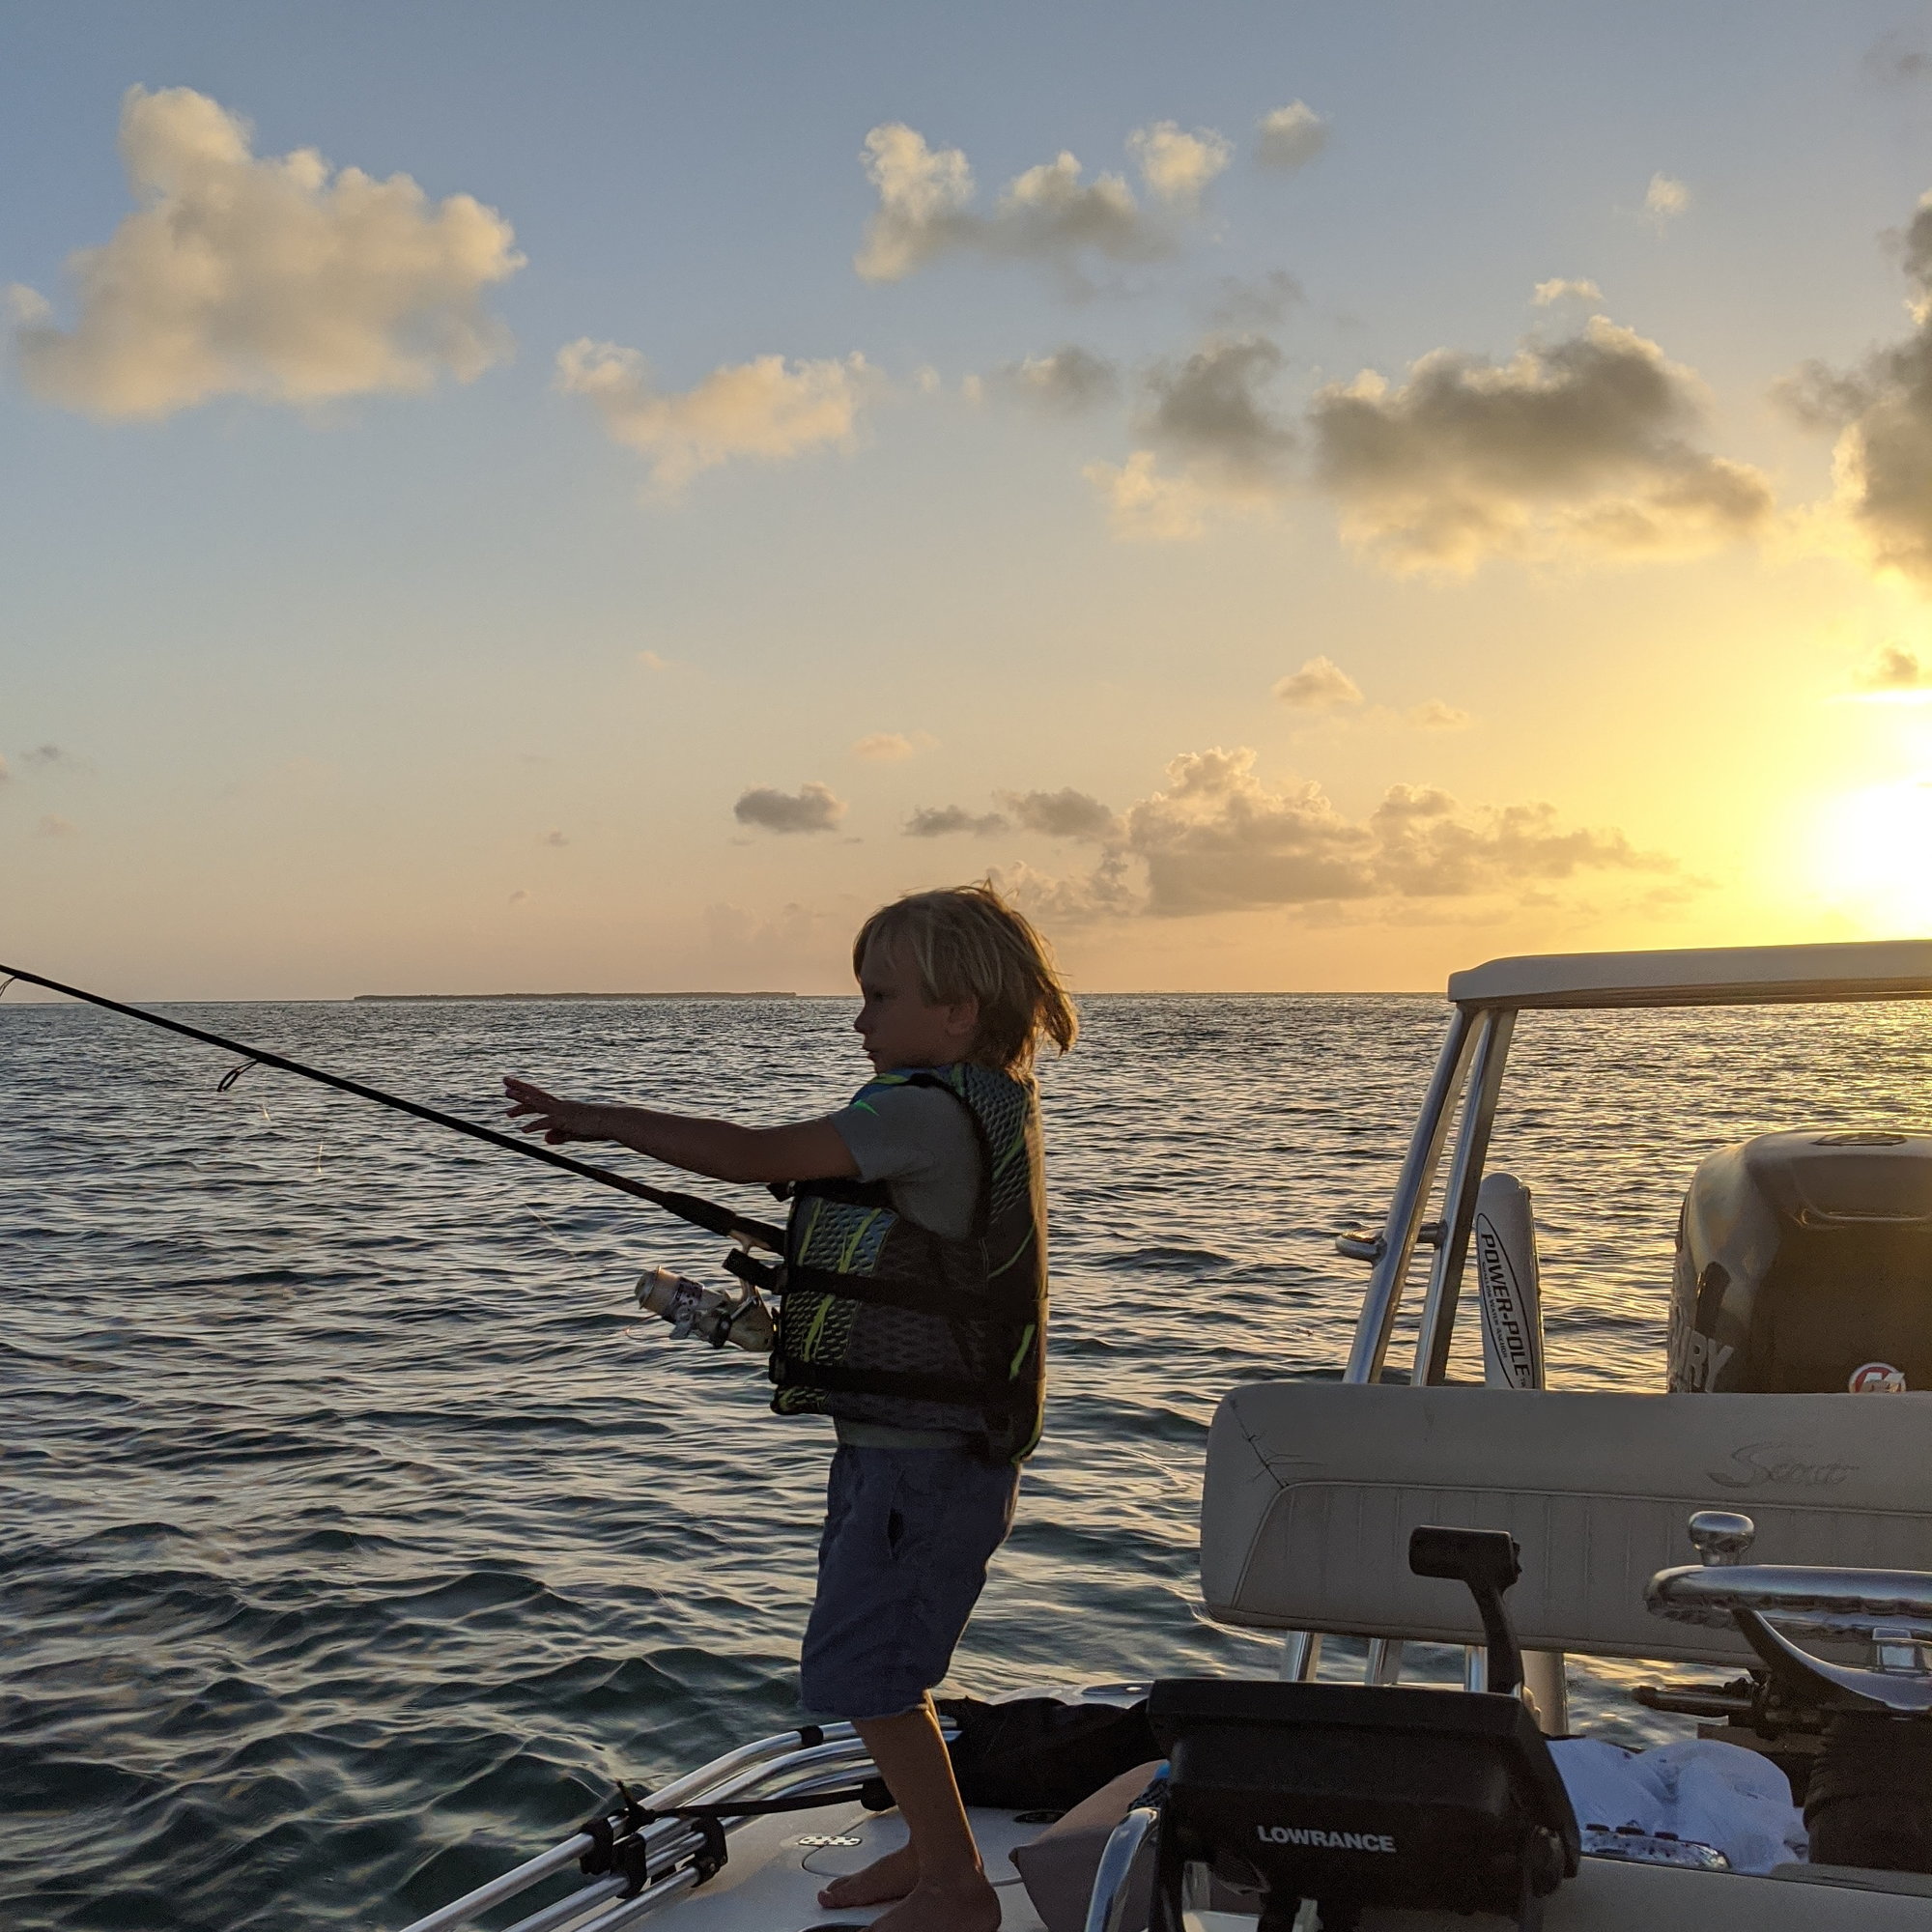 Kids offshore fishing - The Hull Truth - Boating and Fishing Forum